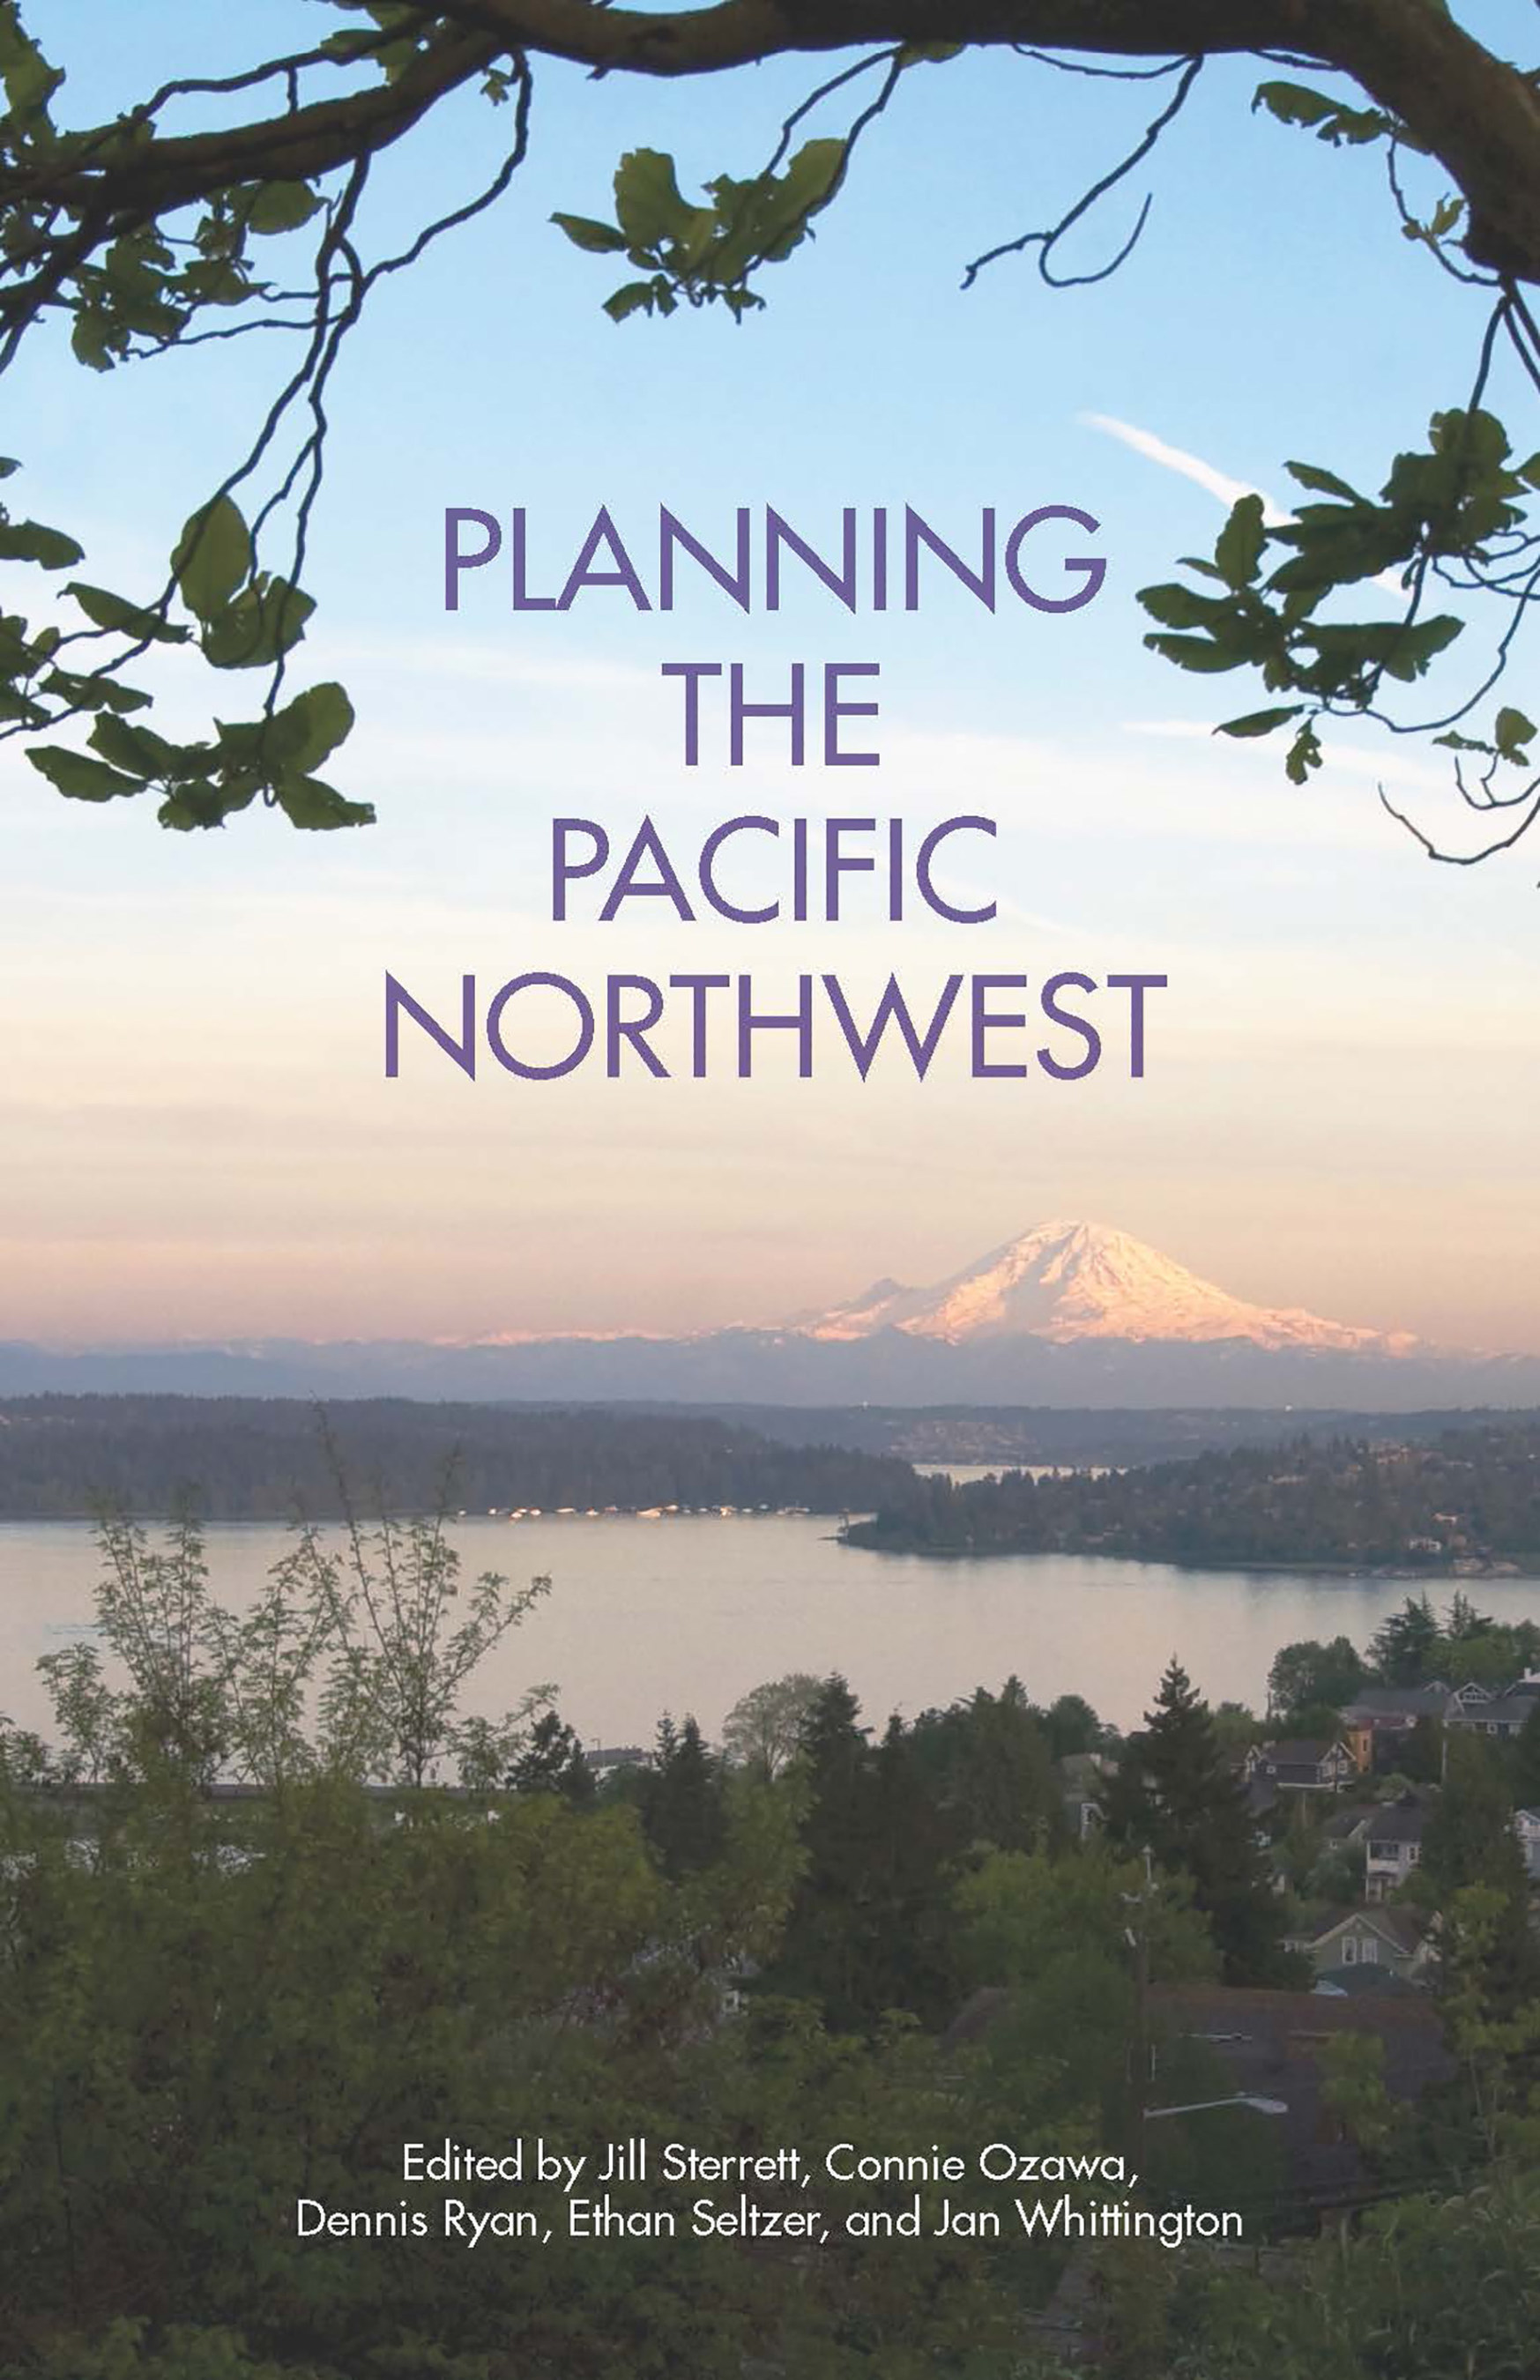 New book from APA Planners Press: Planning the Pacific Northwest. Take a unique journey of the past, present, and future of planning in the region.